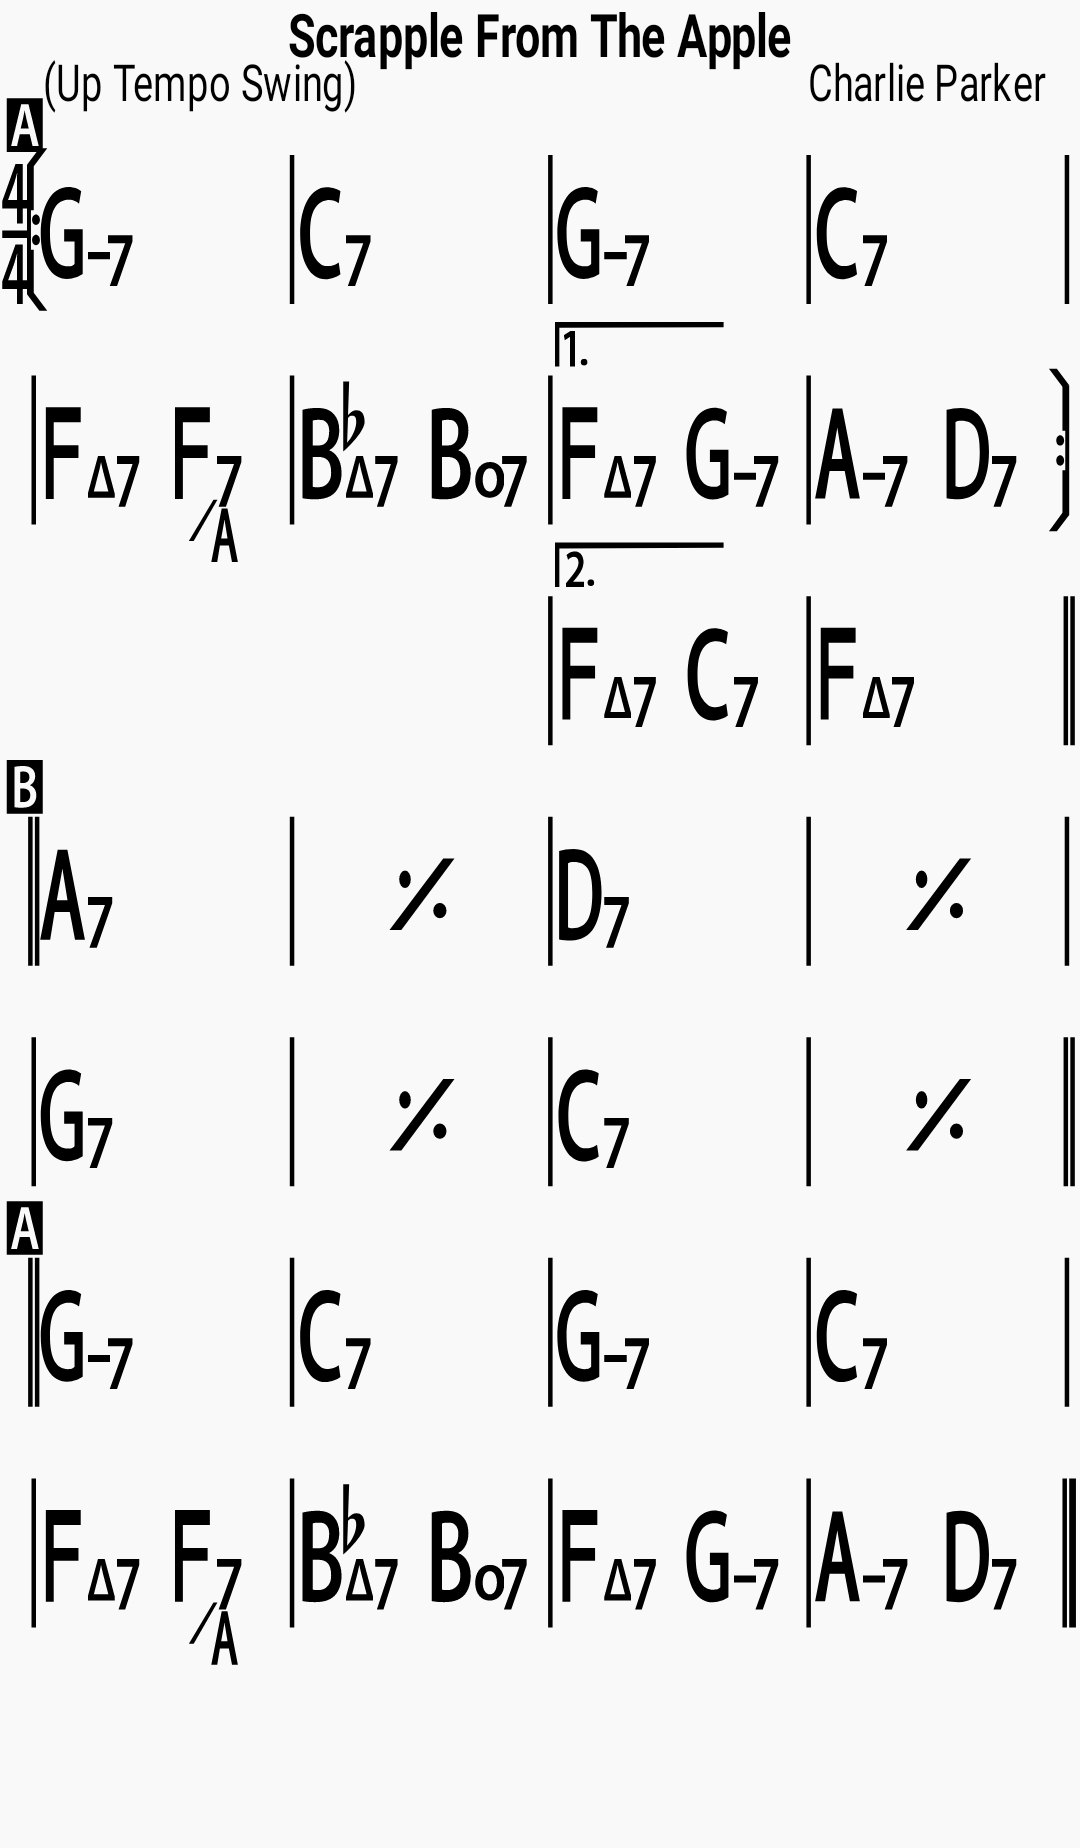 Chord chart for the jazz standard Scrapple From The Apple